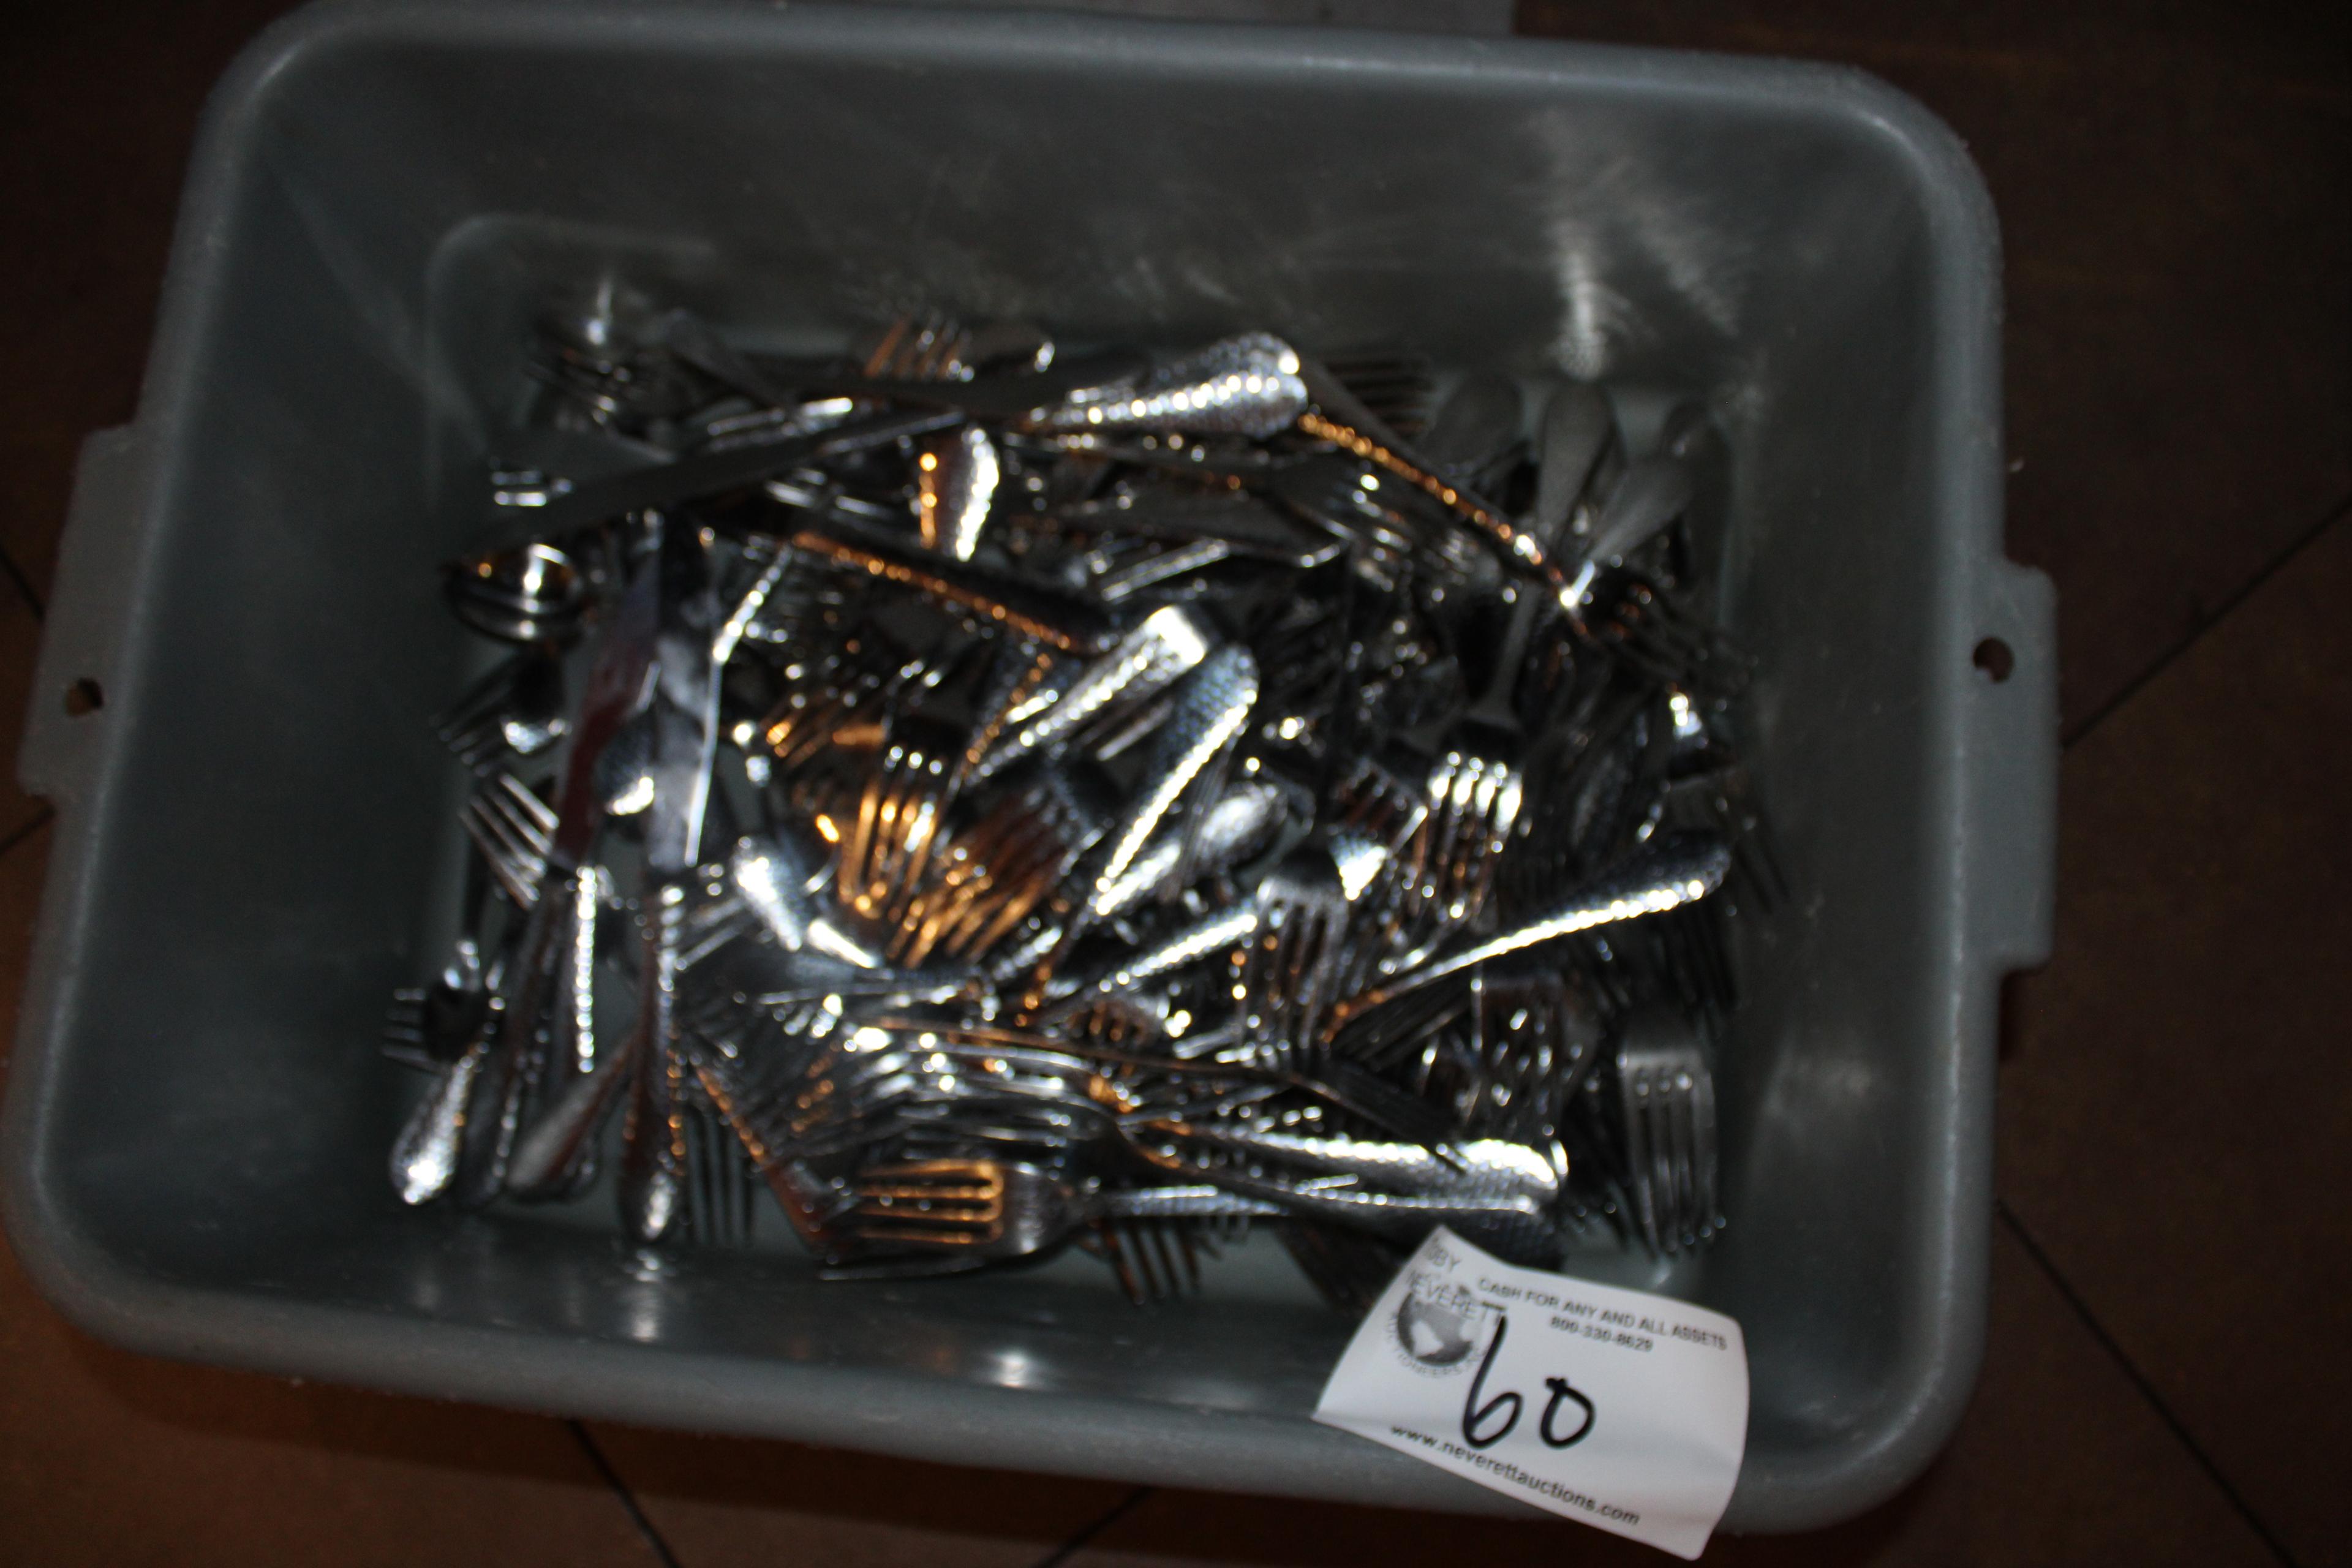 Lot of Assorted Silverware